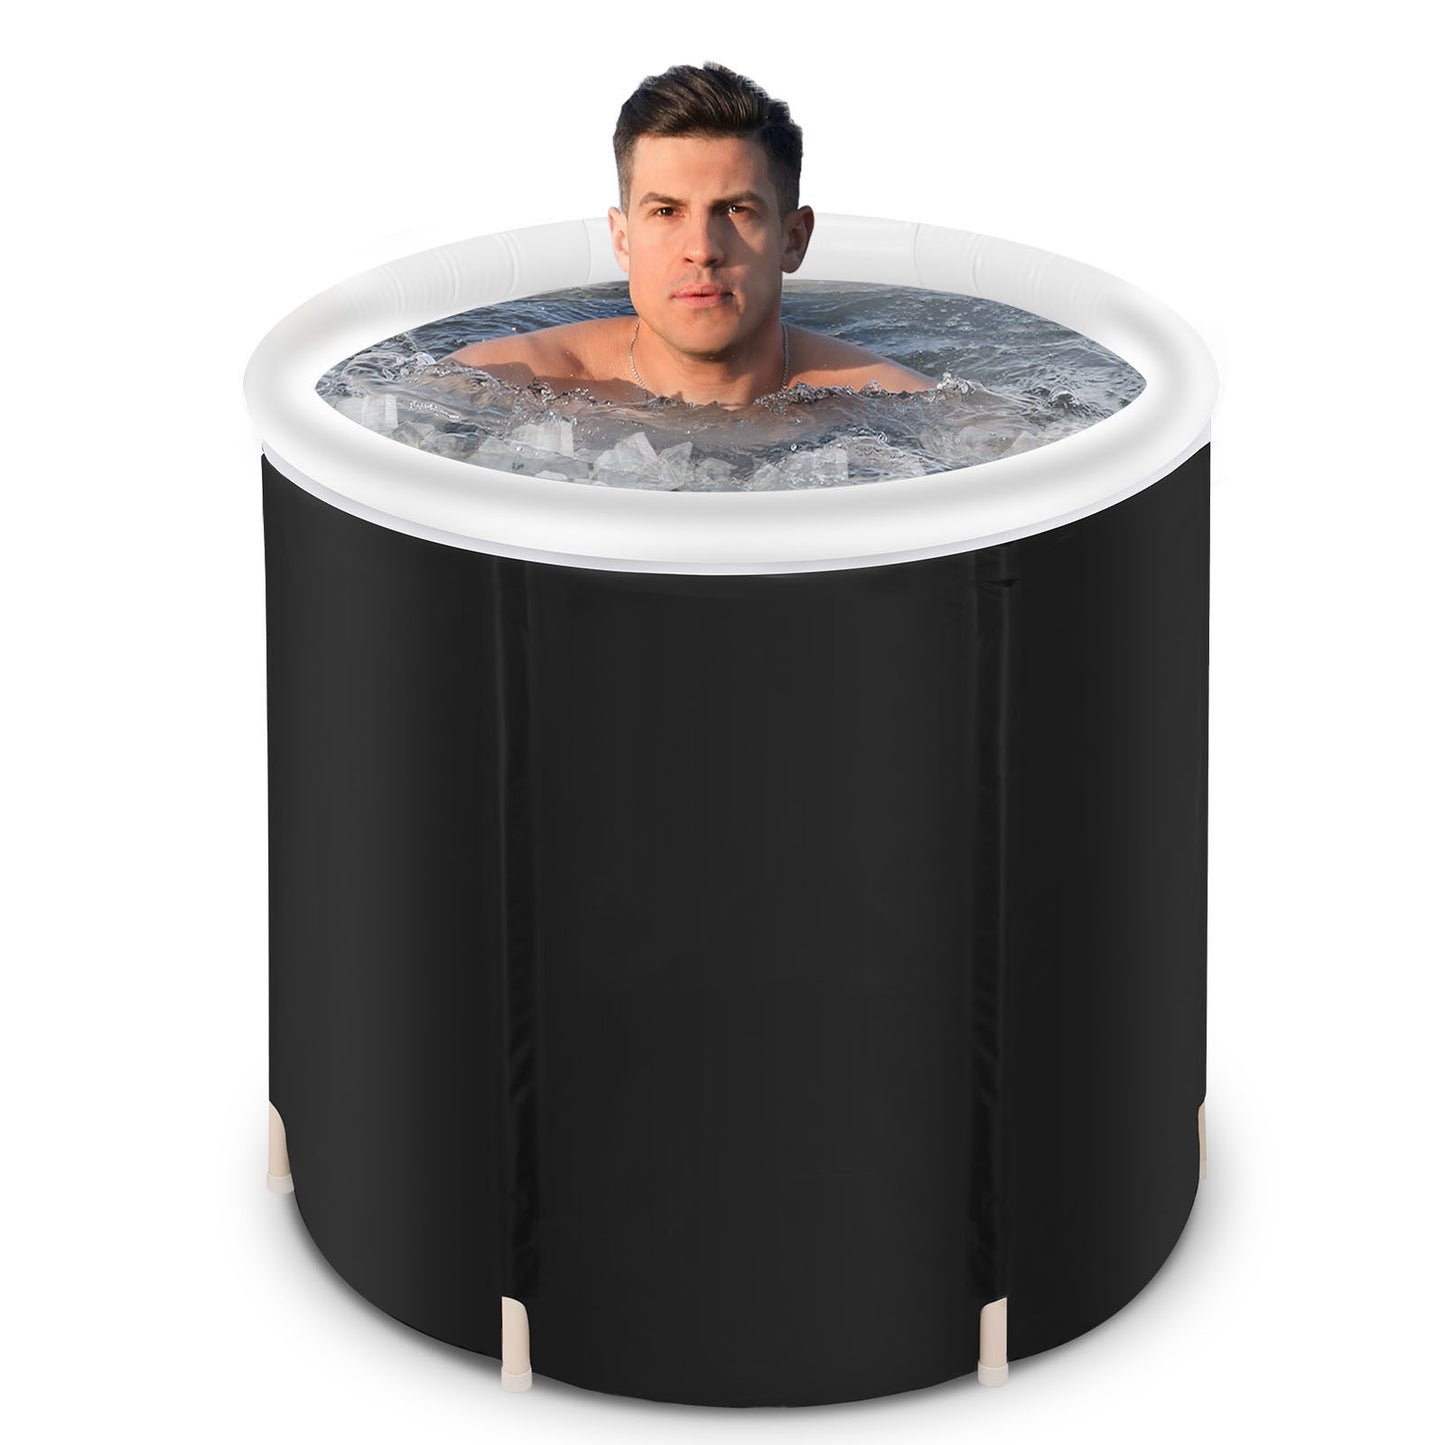 Foldable Recovery therapy  Fitness/Rehab ice tub for Athletes